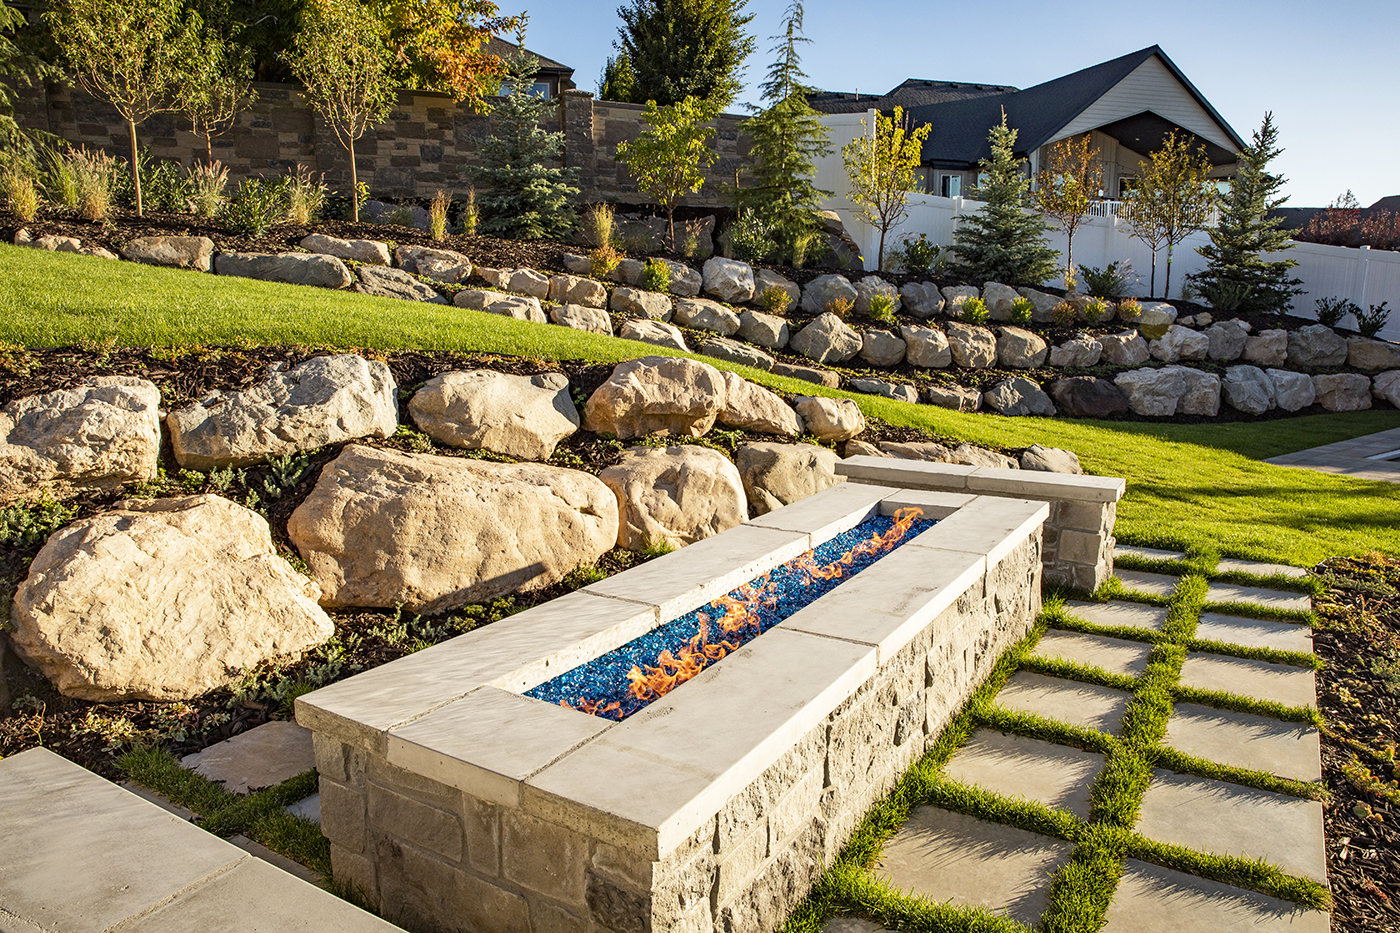 You might think big rocks are just for retaining walls, but we’ll show you that they have a multitude of uses that add natural elegance and beauty to any landscaping project.